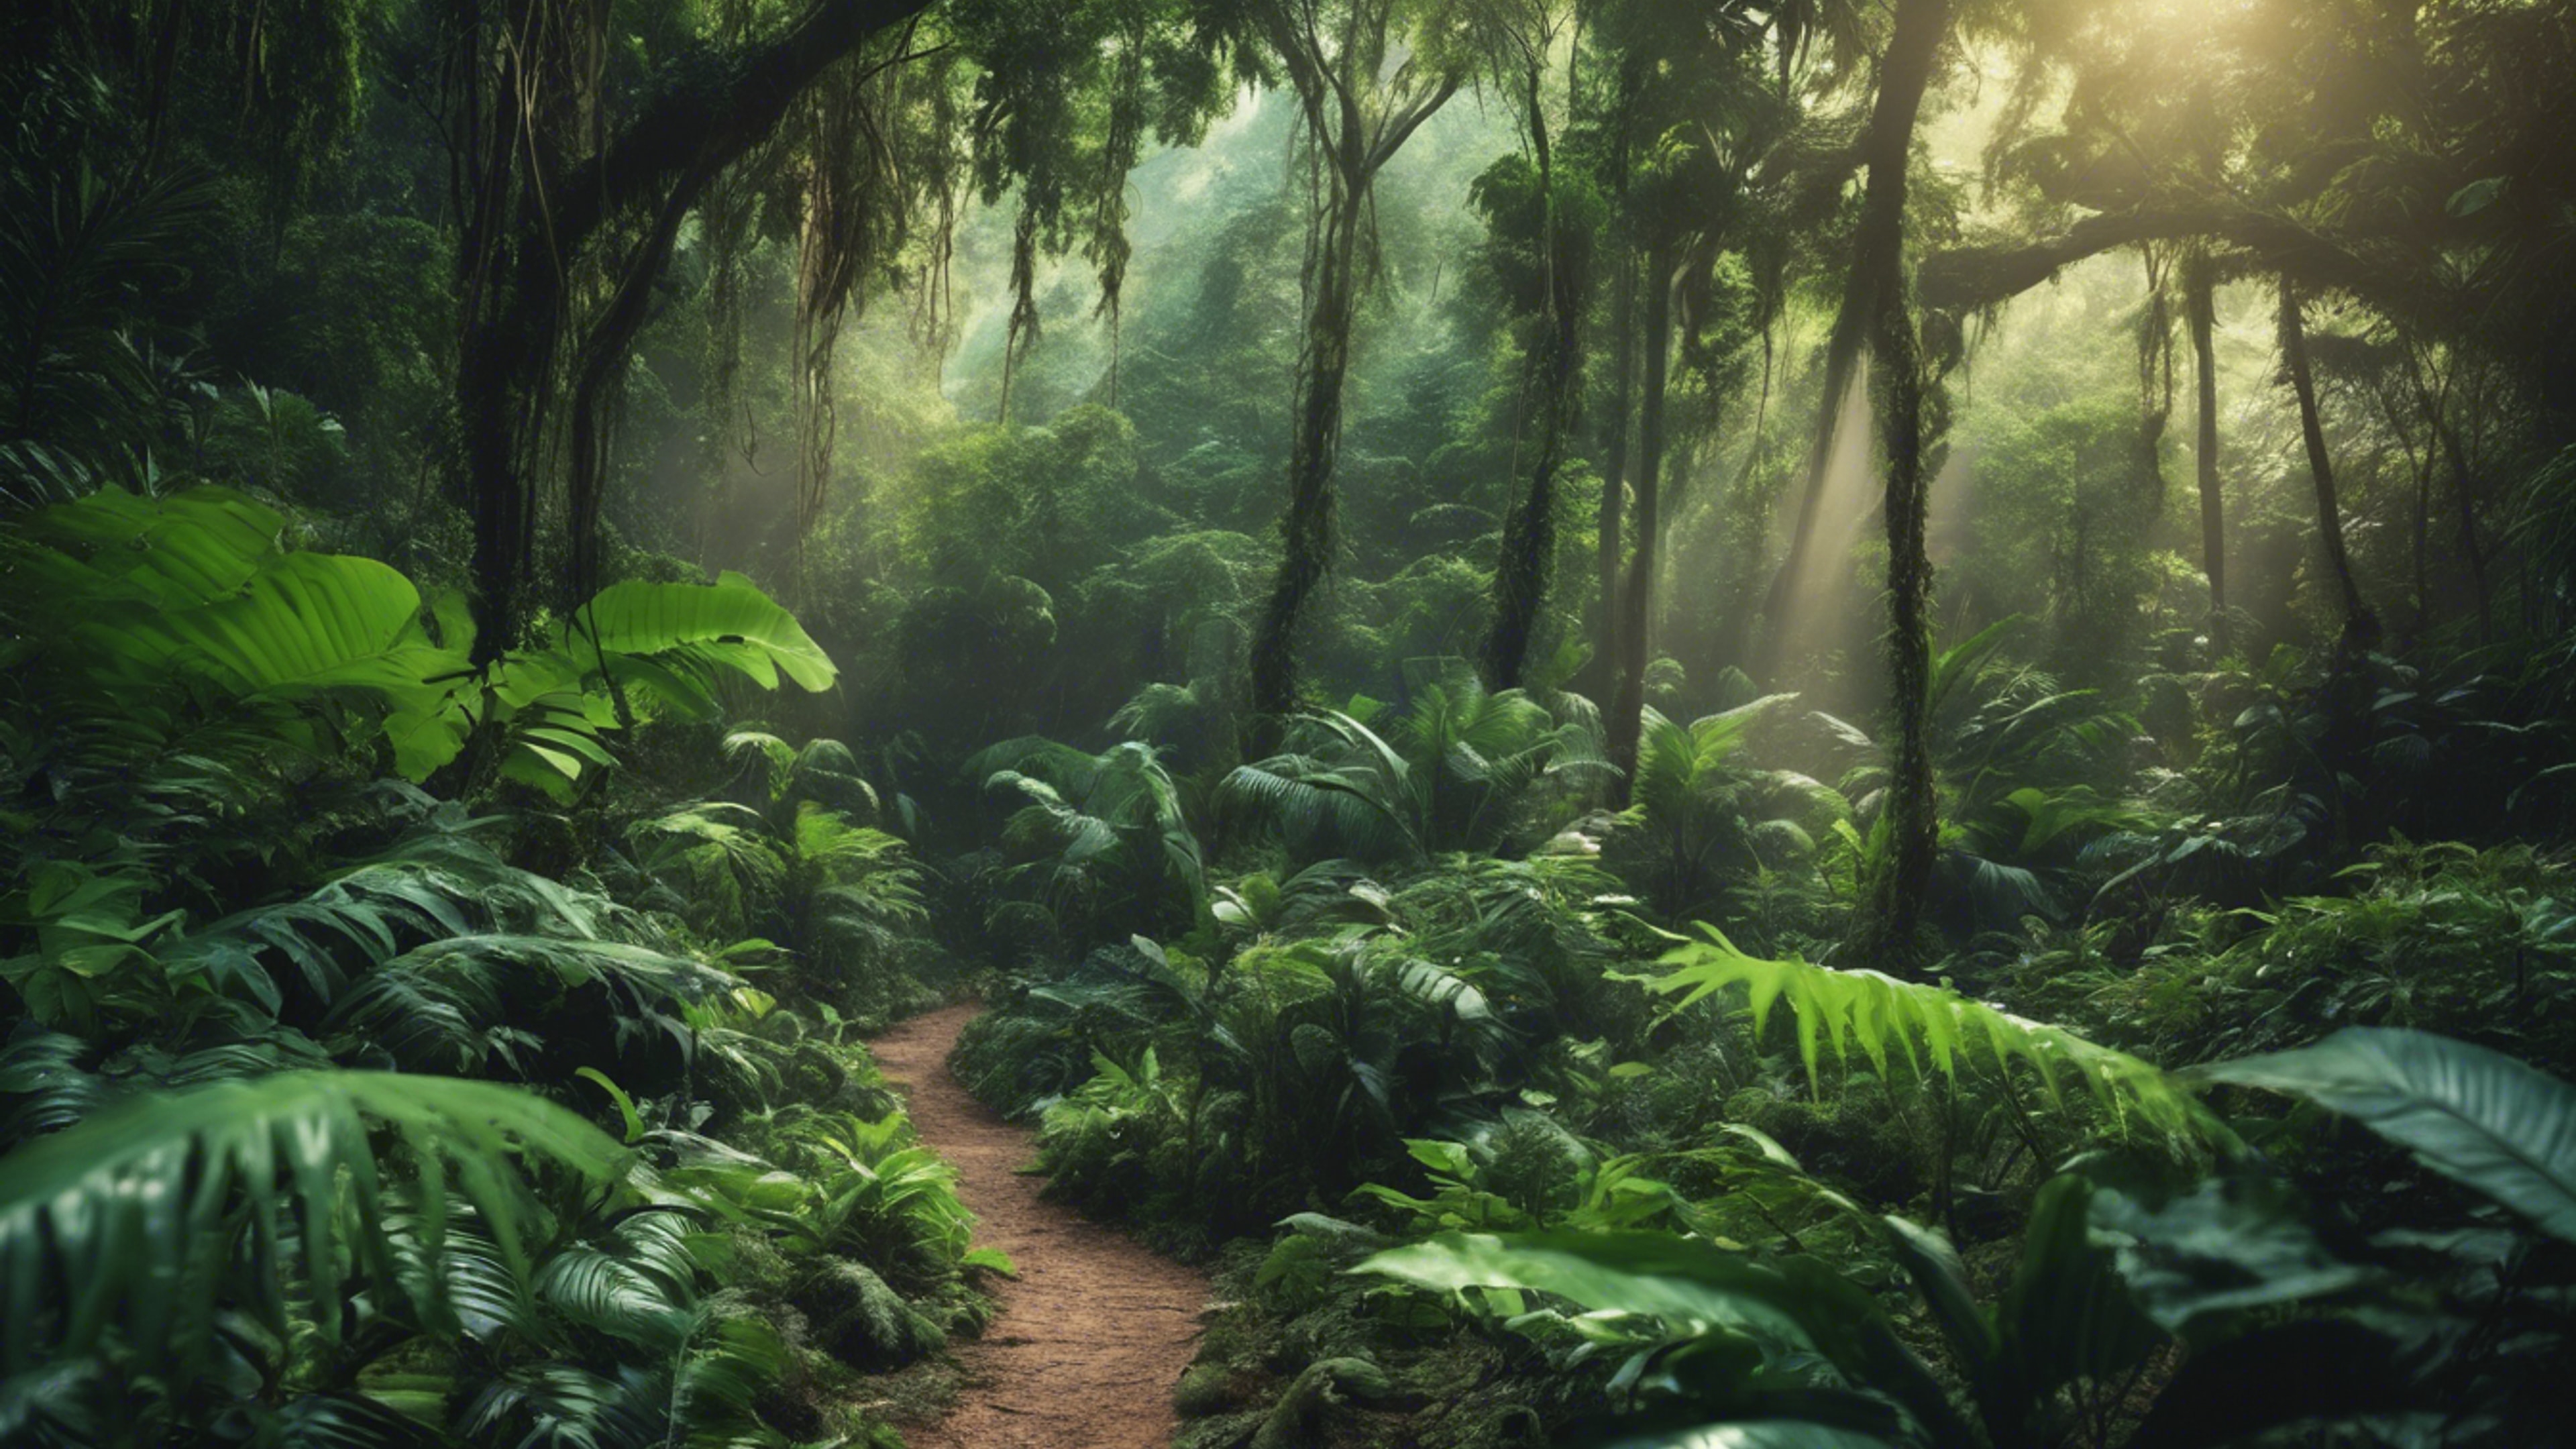 A lush tropical rainforest scene depicting the mysterious aura of nature.壁紙[ca584bb6292f4659923d]